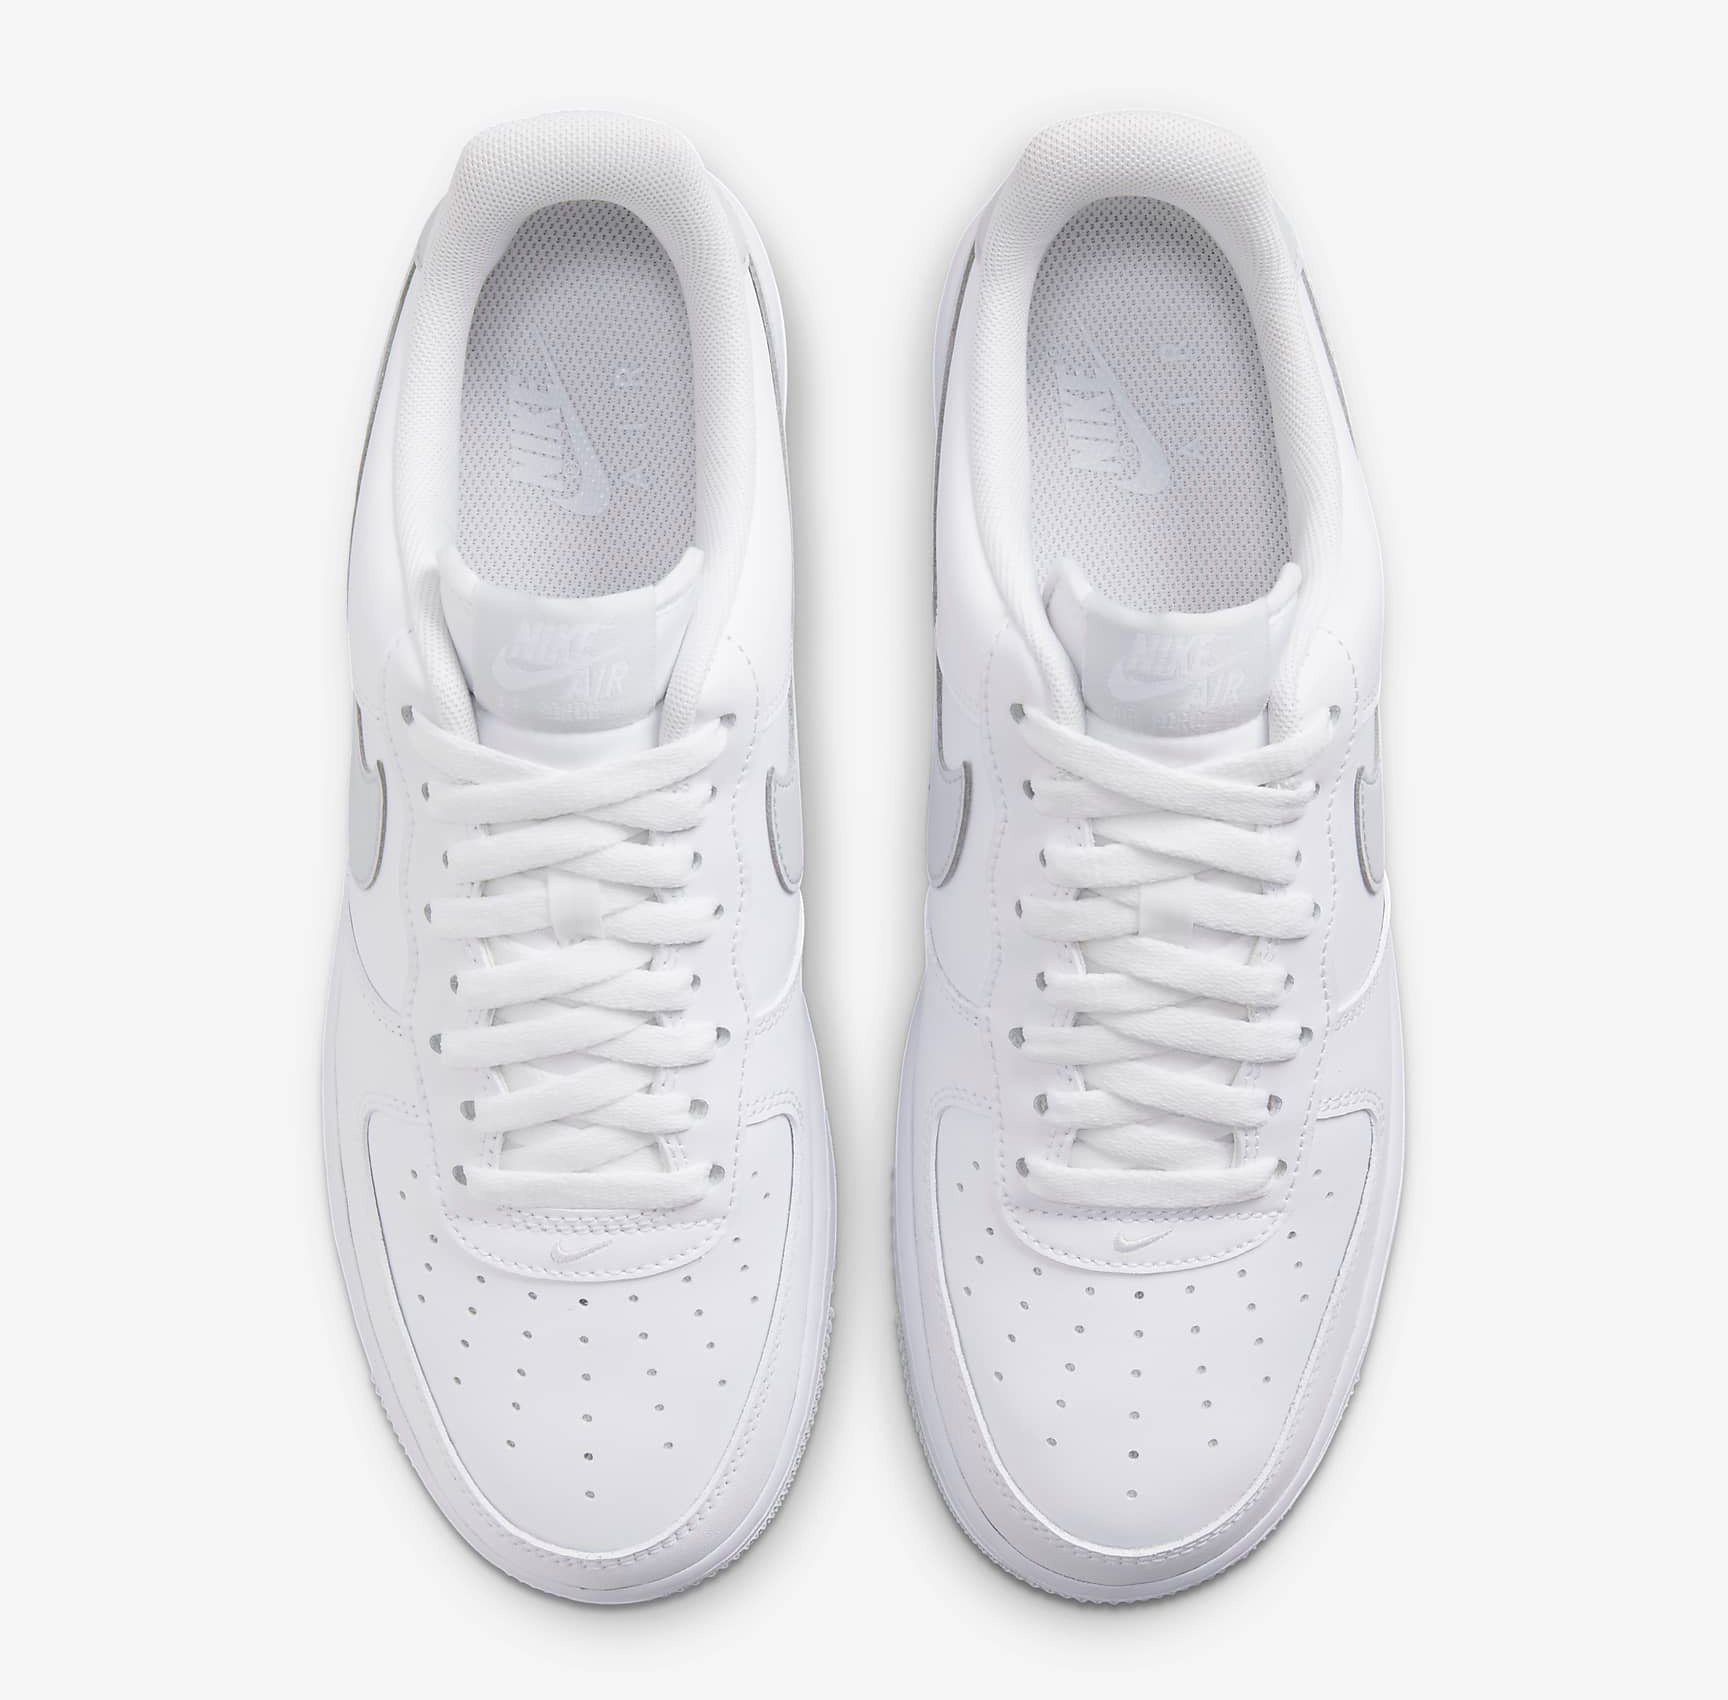 nike-air-force-1-low-white-pure-platinum-4